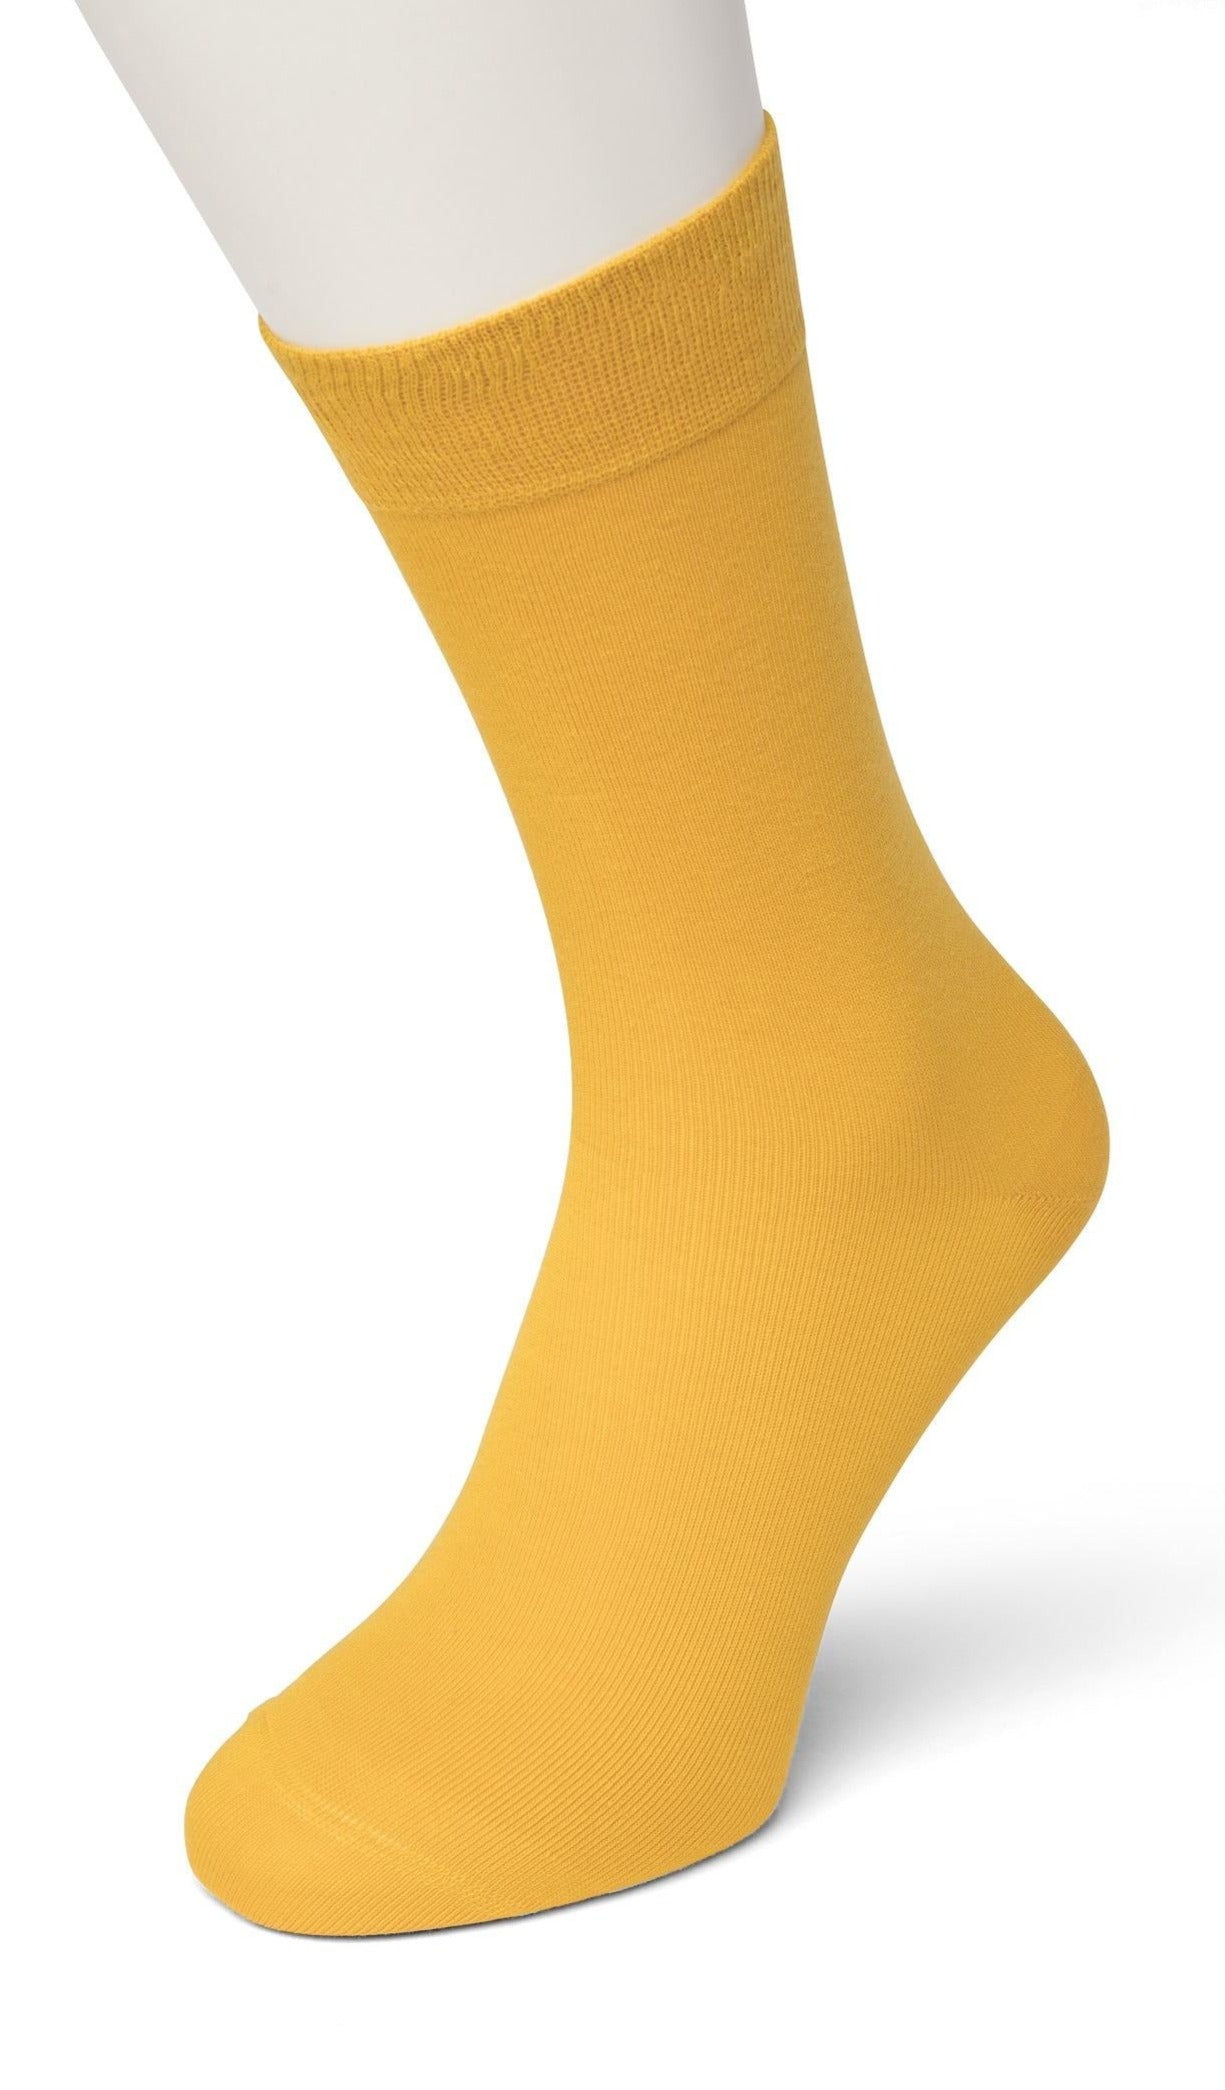 Bonnie Doon 83422 / BD632401 Cotton Sock -  Mustard (egg) ankle socks available in men and women sizes